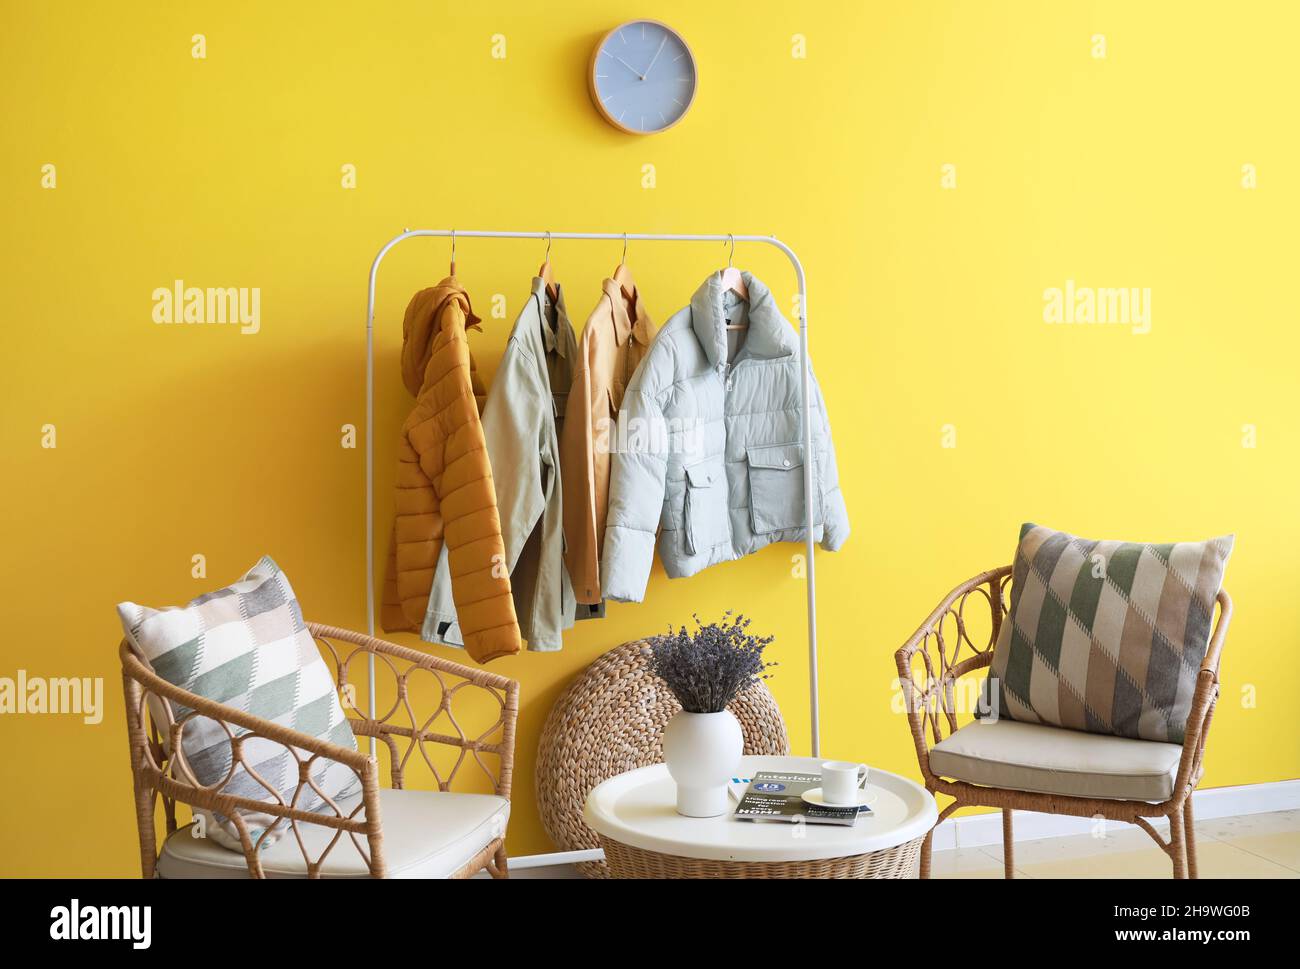 Comfortable chairs and hanger with jackets near color wall in room interior Stock Photo